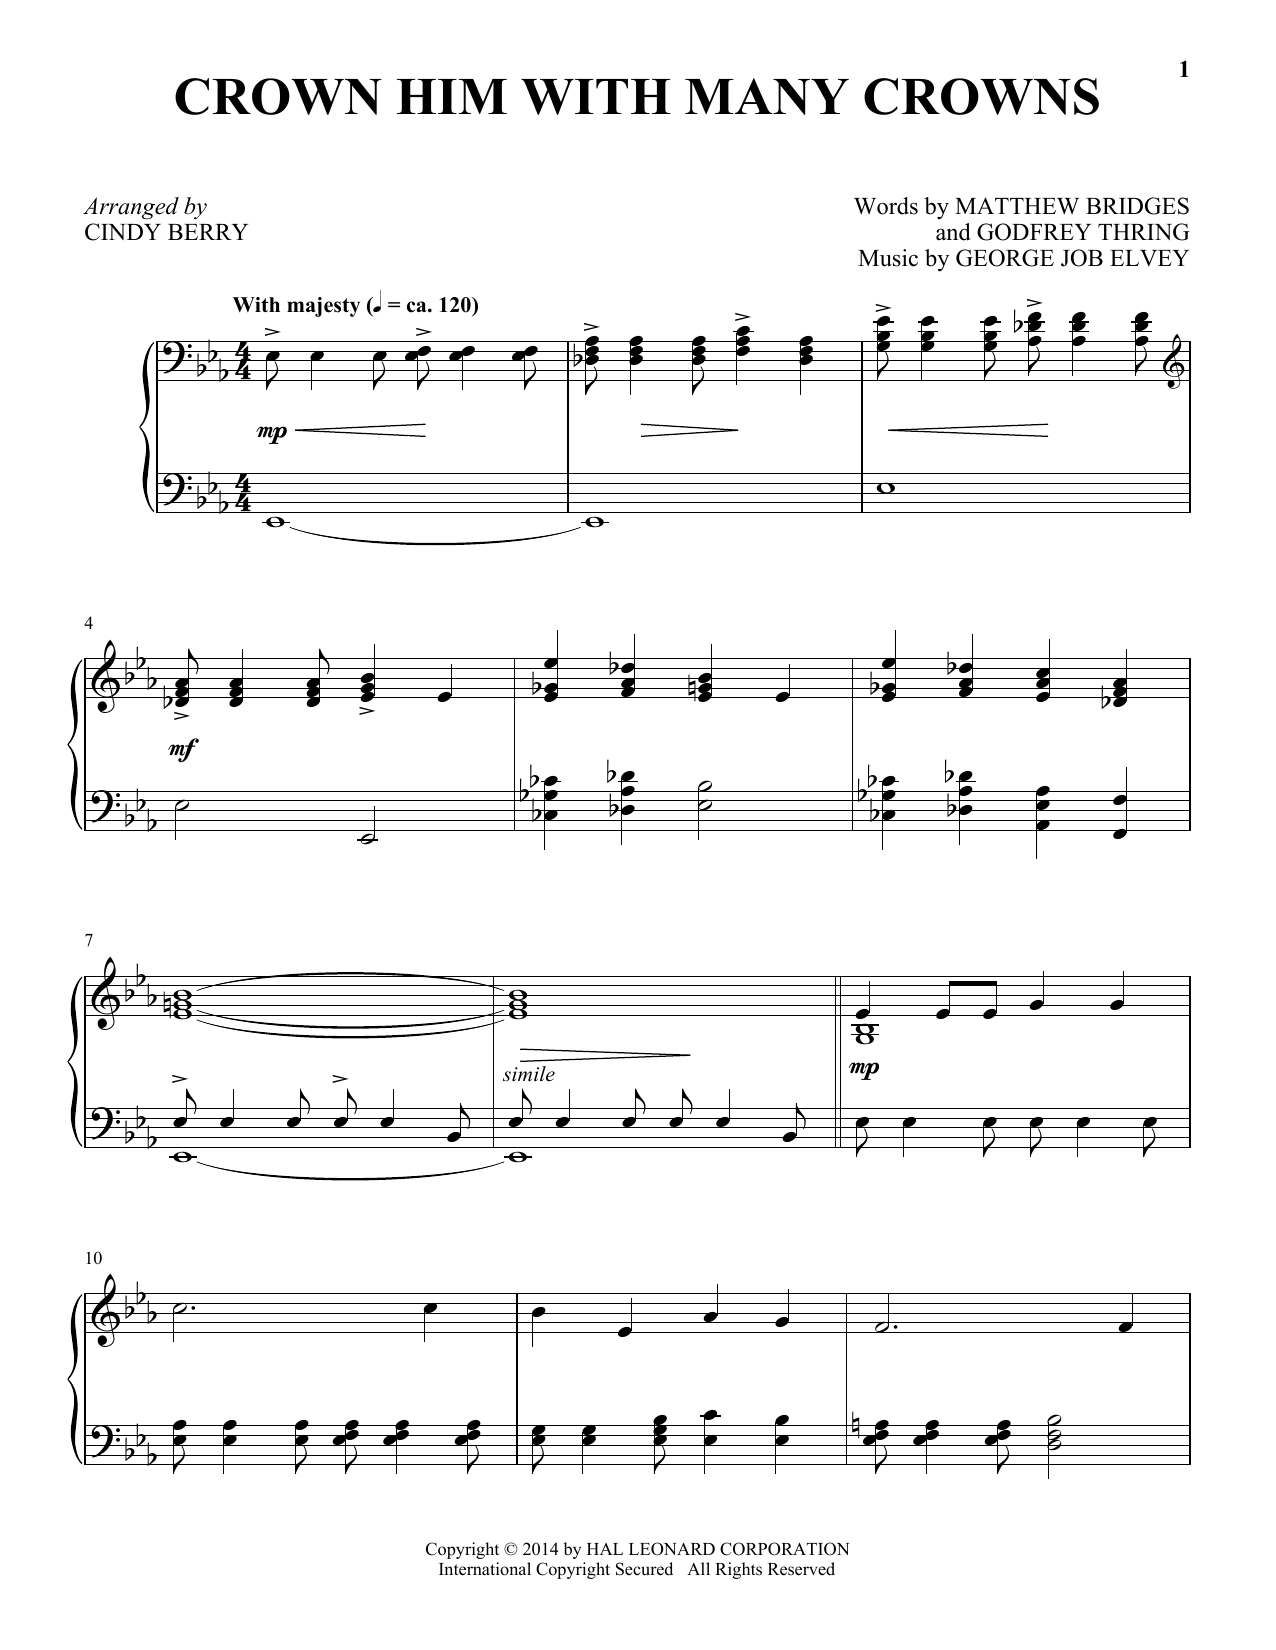 Download Cindy Berry Crown Him With Many Crowns Sheet Music